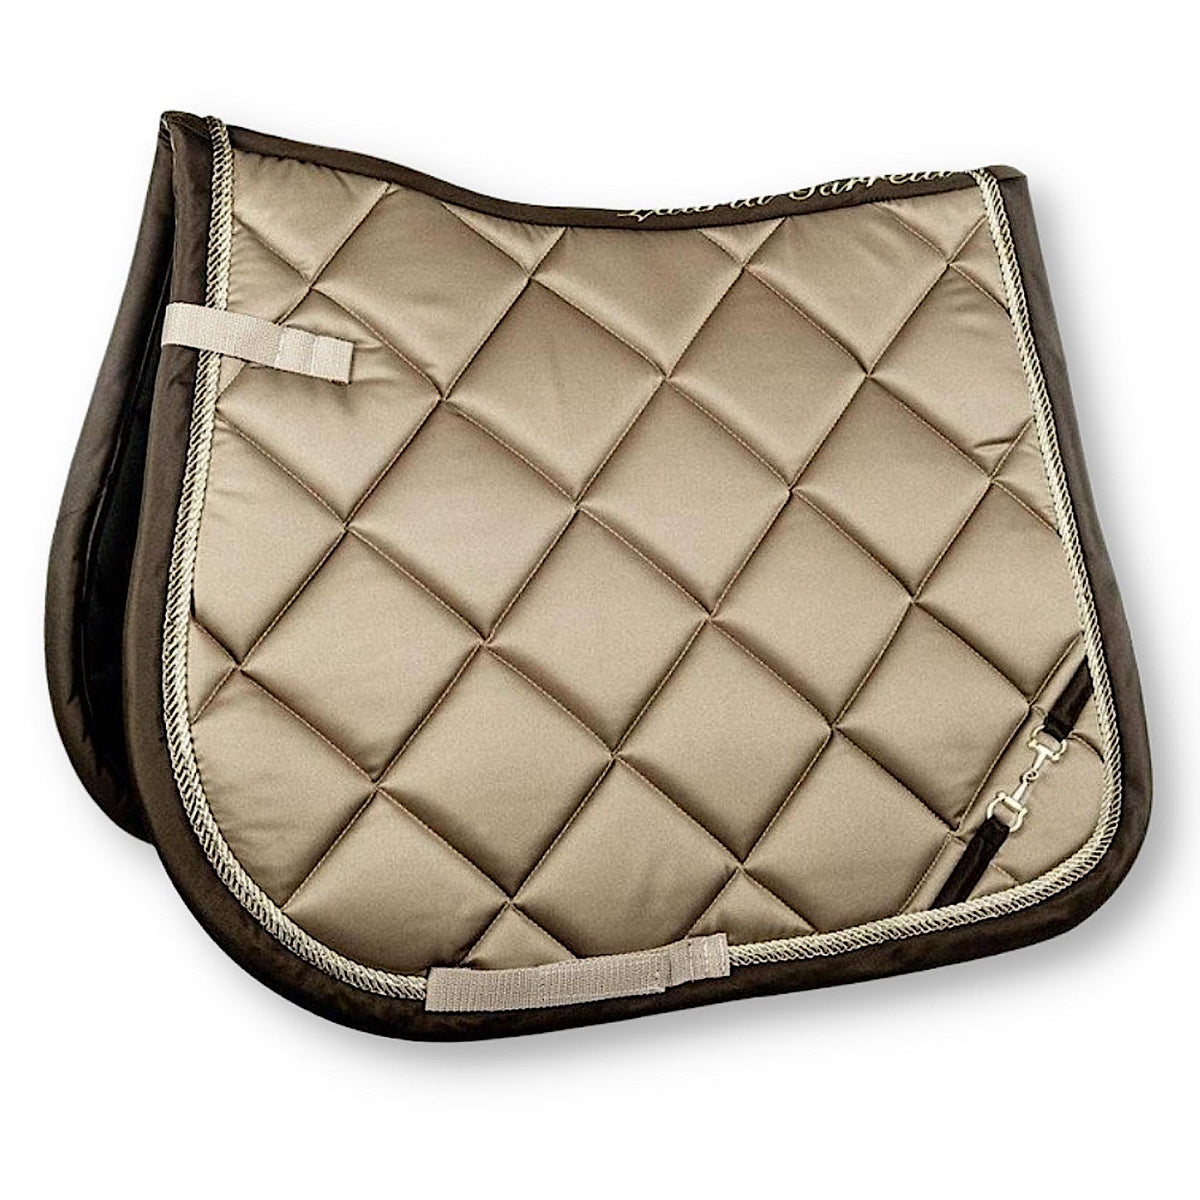 Taupe coloured saddle pad with satin appearance, brown trim and bit detail.